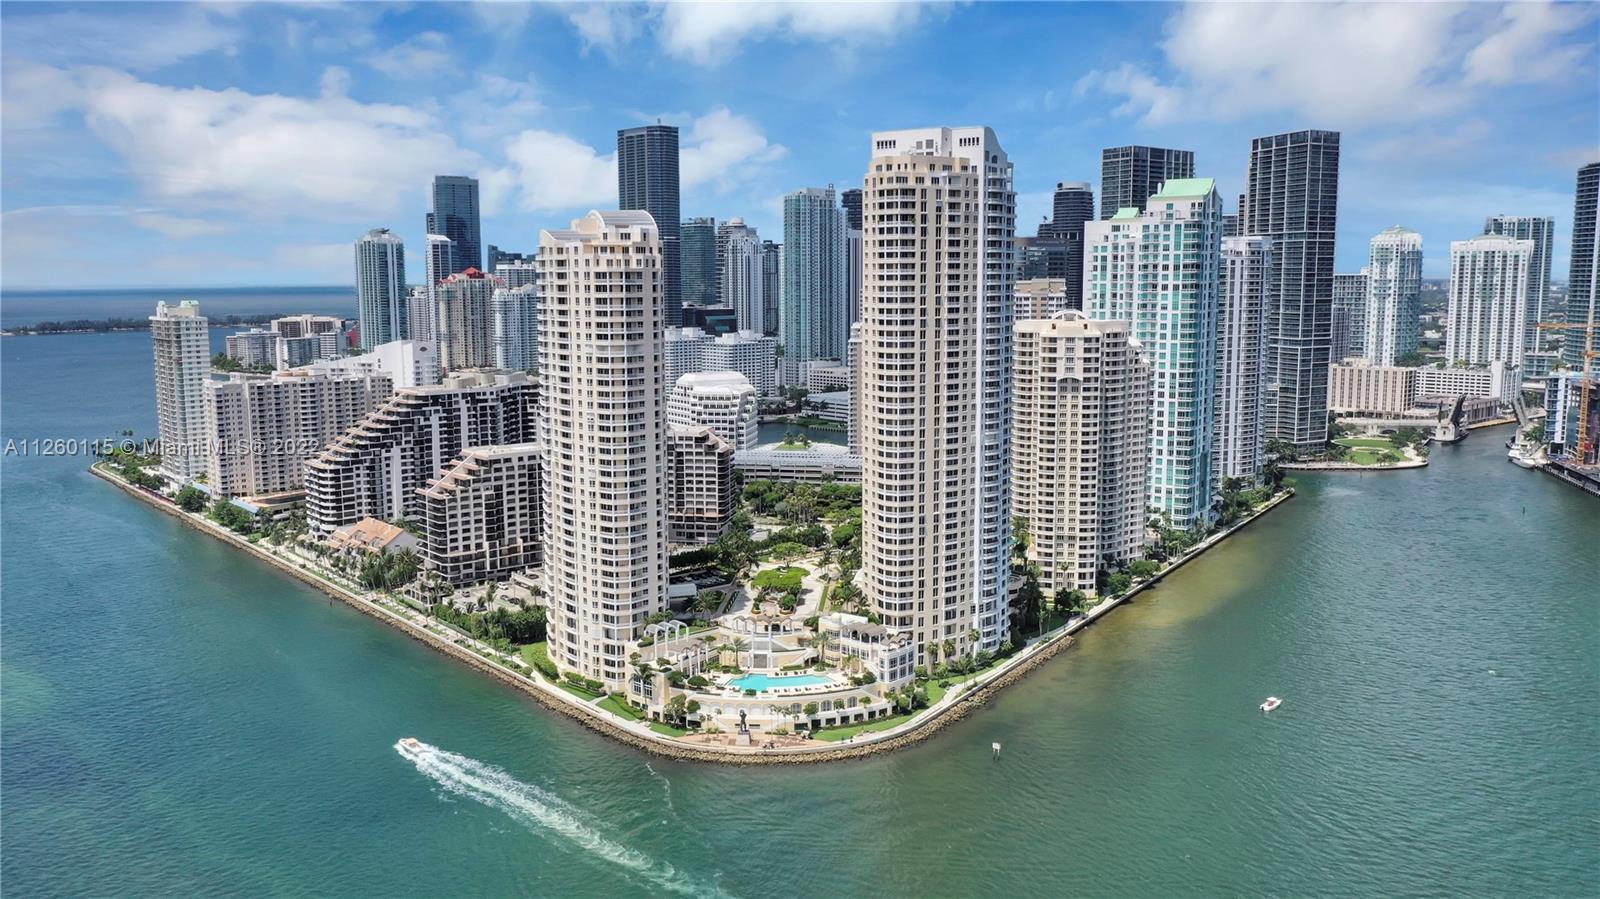 The crown jewel of The Courts is finally here! Completely remodeled unit 2bed/2.5bath w/2 assigned parking spaces in highly sought 08 line. Enjoy views of the Miami River, Biscayne Bay & Miami Skyline from the privacy of your oversized balconies. Master features private balcony, walk-in closet, ensuite bath w/double vanities. Beautifully redesigned kitchen w/high end s/s appliances, large family room w/skyline views perfect for entertaining, formal dining (can be converted to den), new A/C w/Nest, Hue automated lighting system, electric window treatments throughout. 2nd bedroom features a redesigned ensuite bathroom w/storage. Amenities incl: racquet ball, state of the art gym, yoga, spinning & crossfit rooms. Arguably the best ran building in the Key. Bring your most discerning buyers!